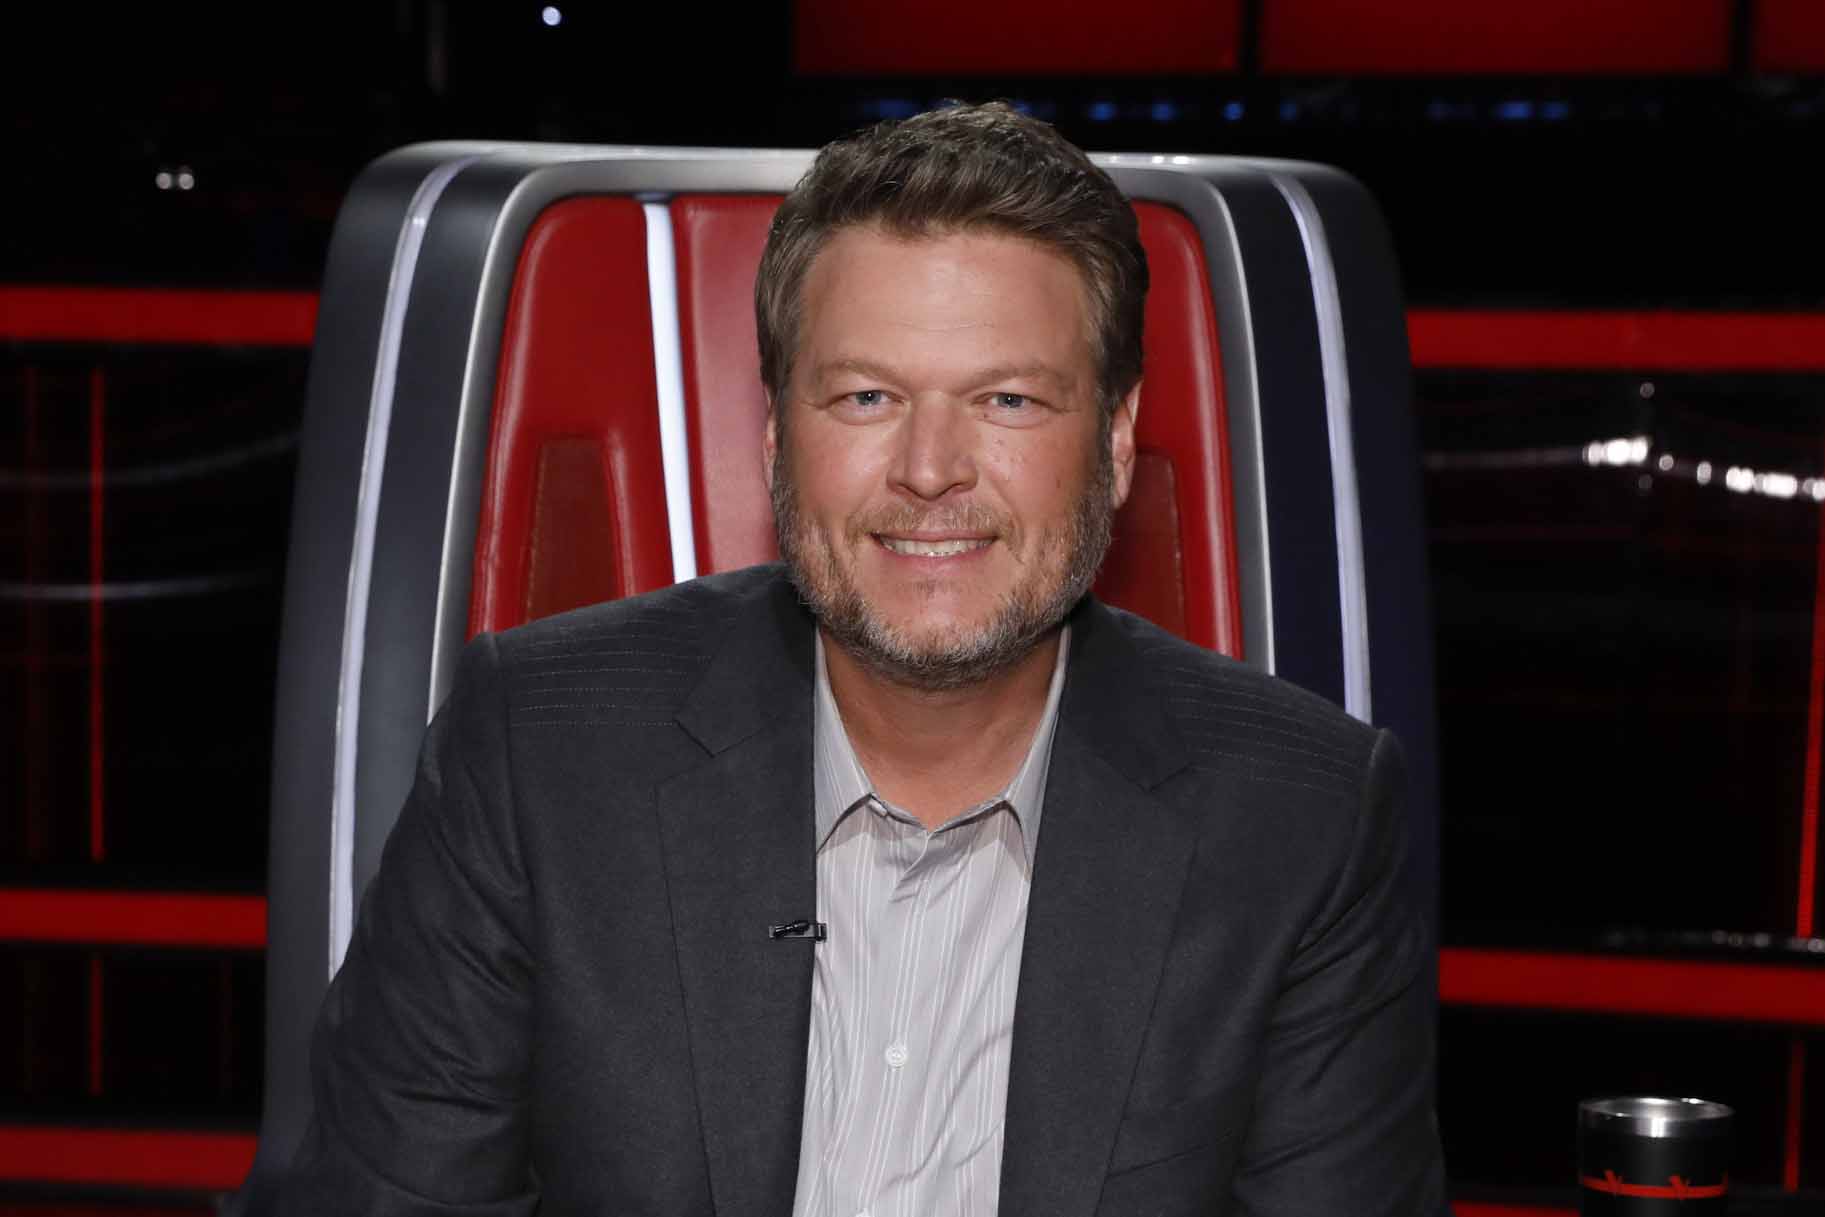 Yes, Blake Shelton also had a mullet hairstyle as a teenager